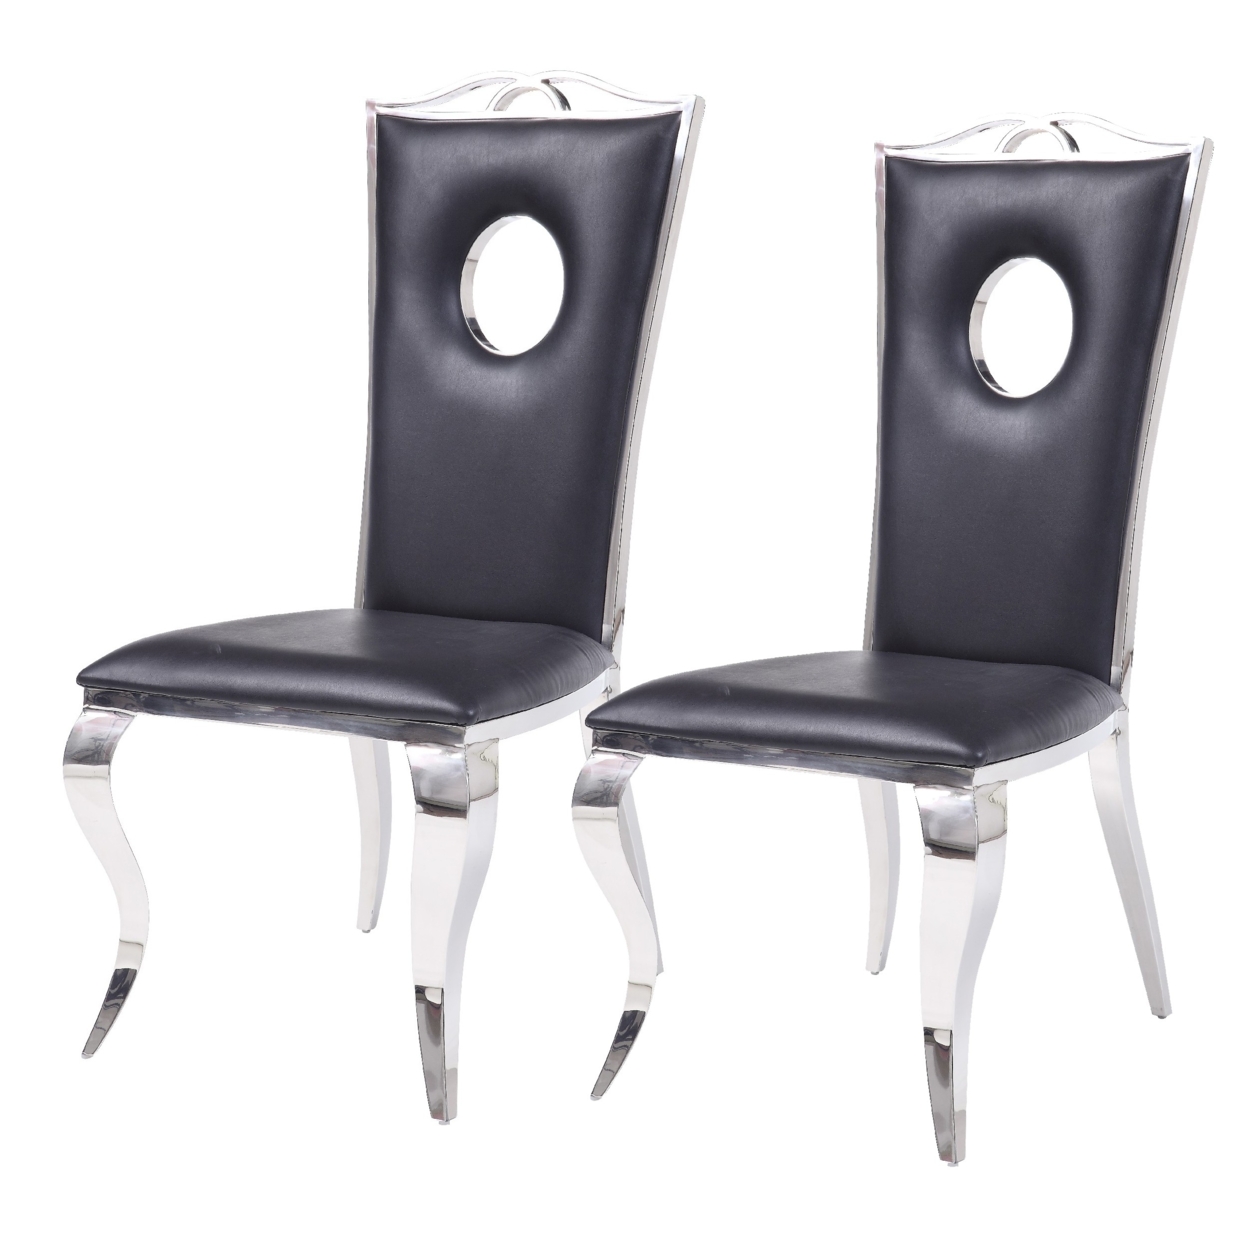 19 Inch Dining Side Chair, Faux Leather, Set Of 2, Black, Silver- Saltoro Sherpi